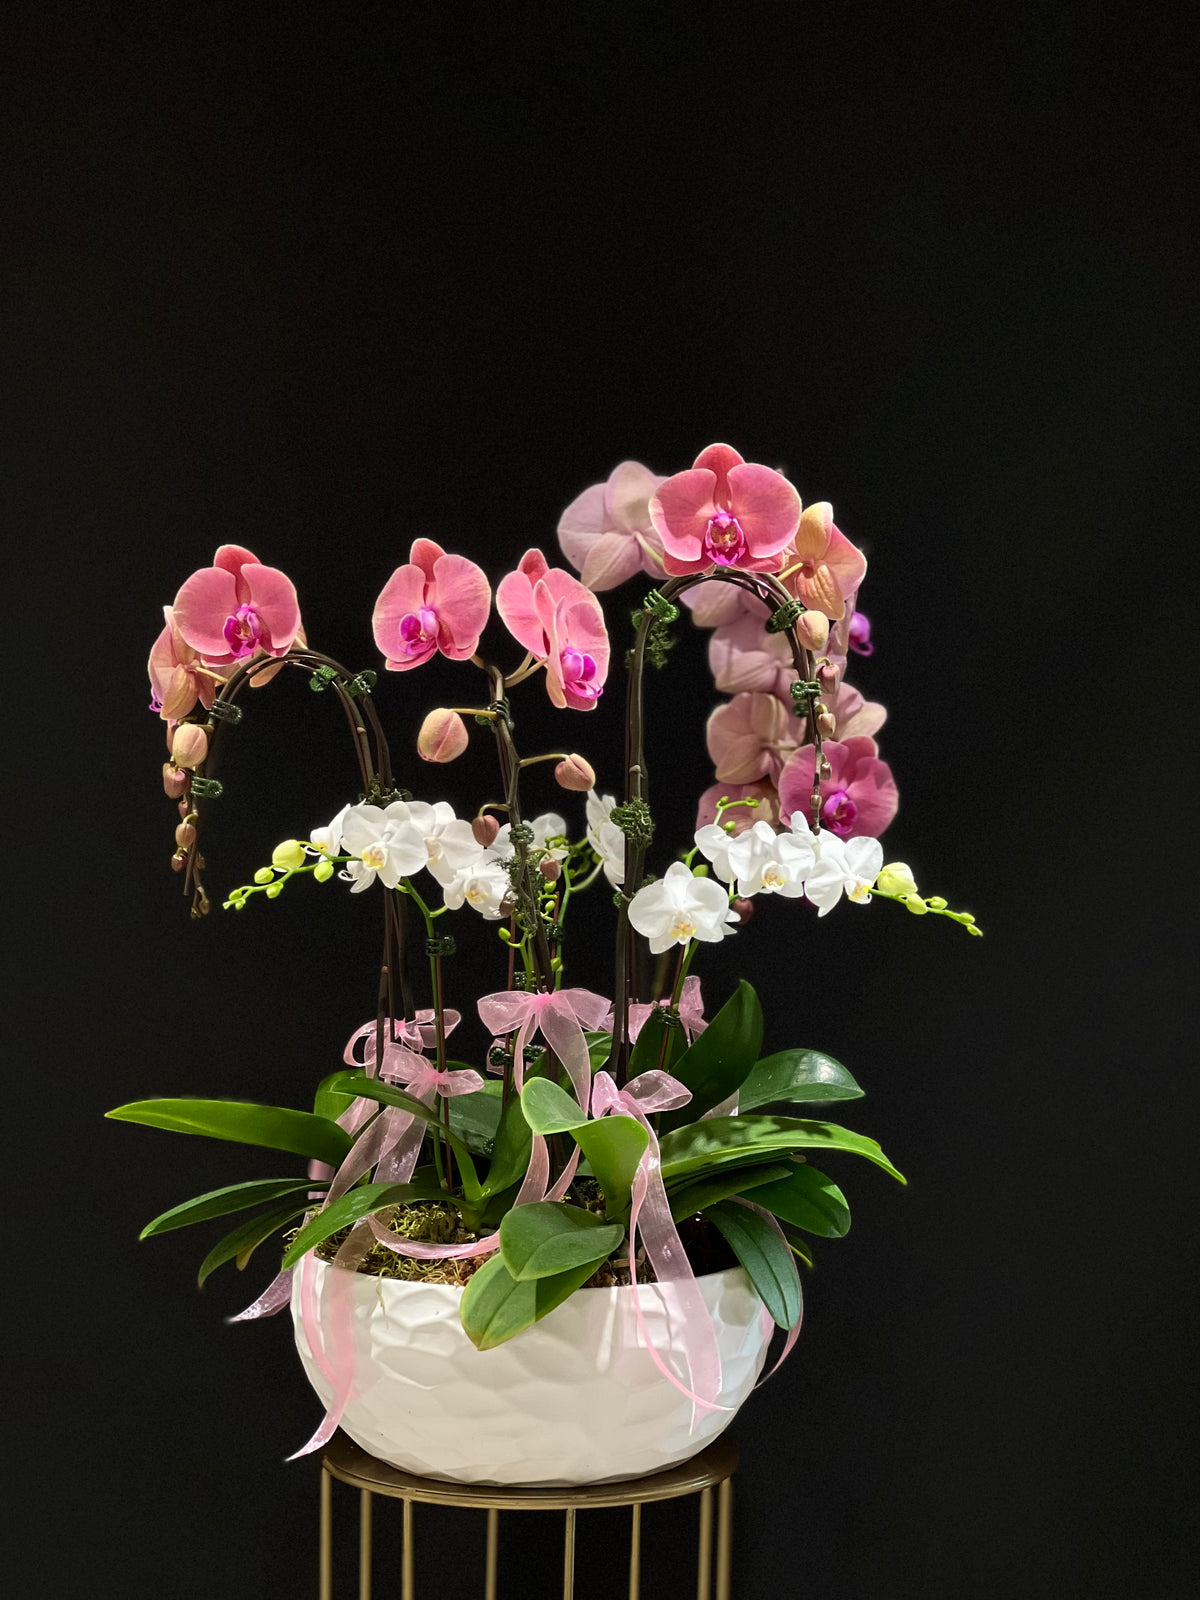 Double Stem Orchid Elegance - Large cascading Stem Orchids and mini orchids in a ceramic or fiberglass pot, perfect for celebrating new beginnings, anniversaries, or expressing gratitude.